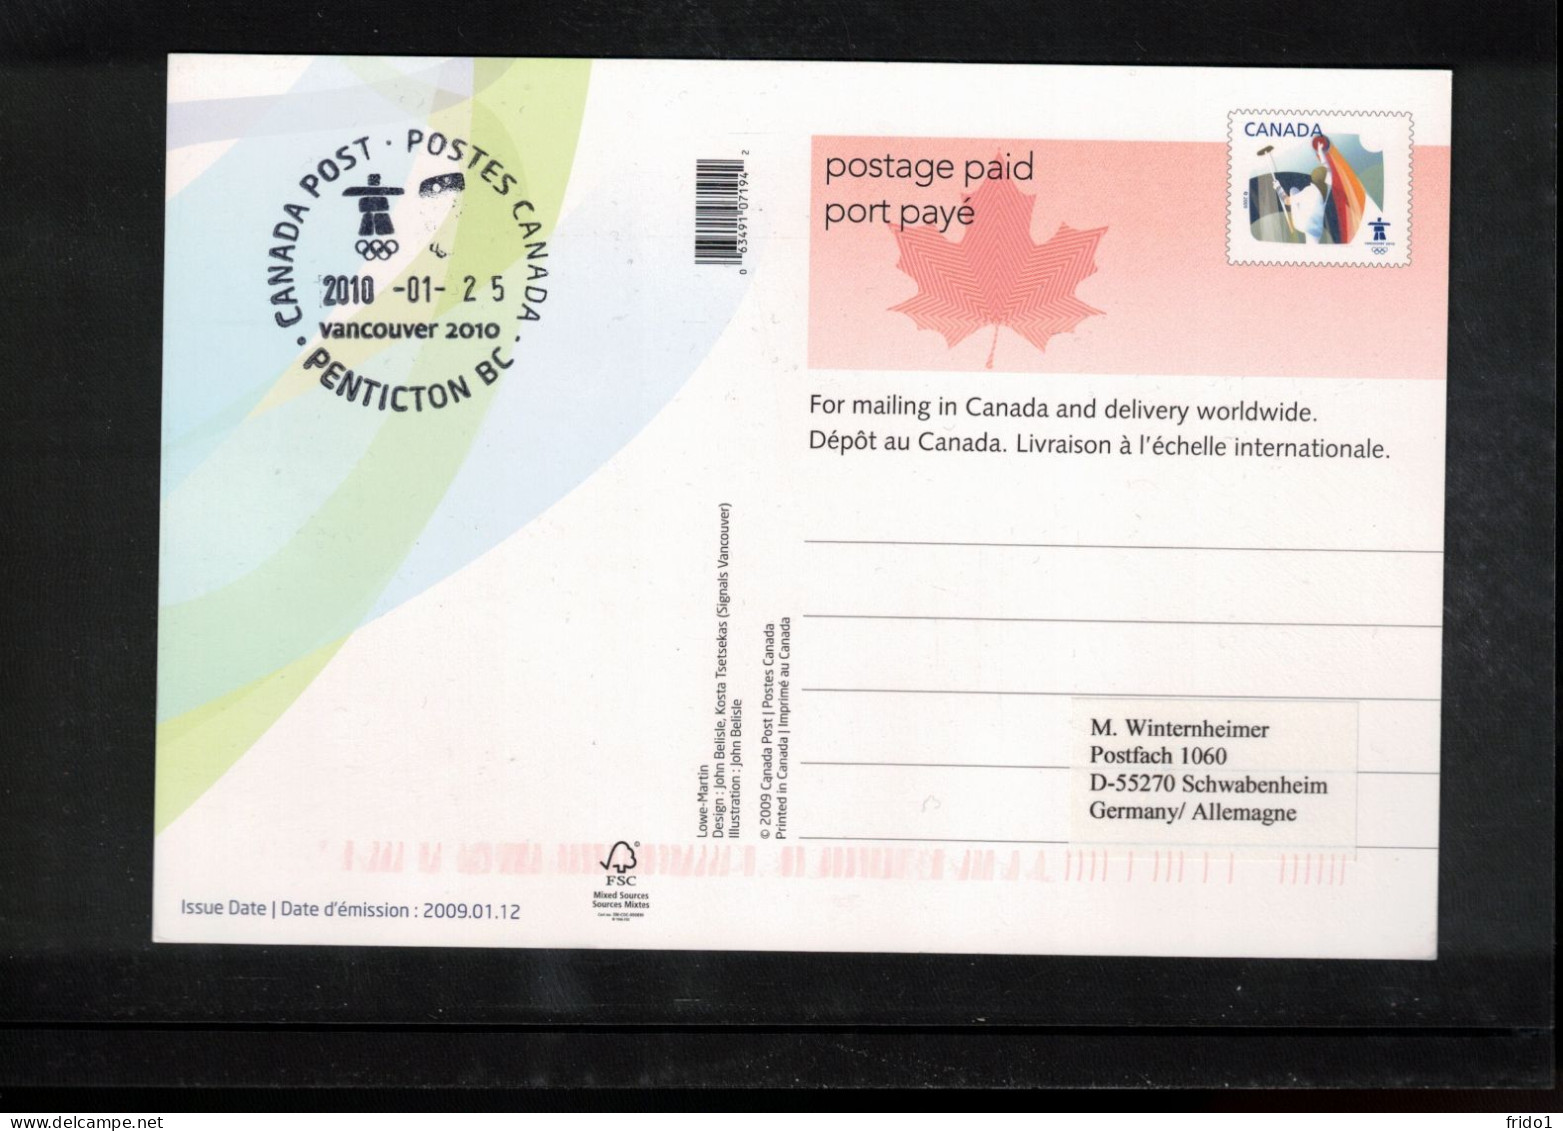 Canada 2010 Olympic Games Vancouver - PENTICTON BC Postmark Interesting Postcard - Hiver 2010: Vancouver